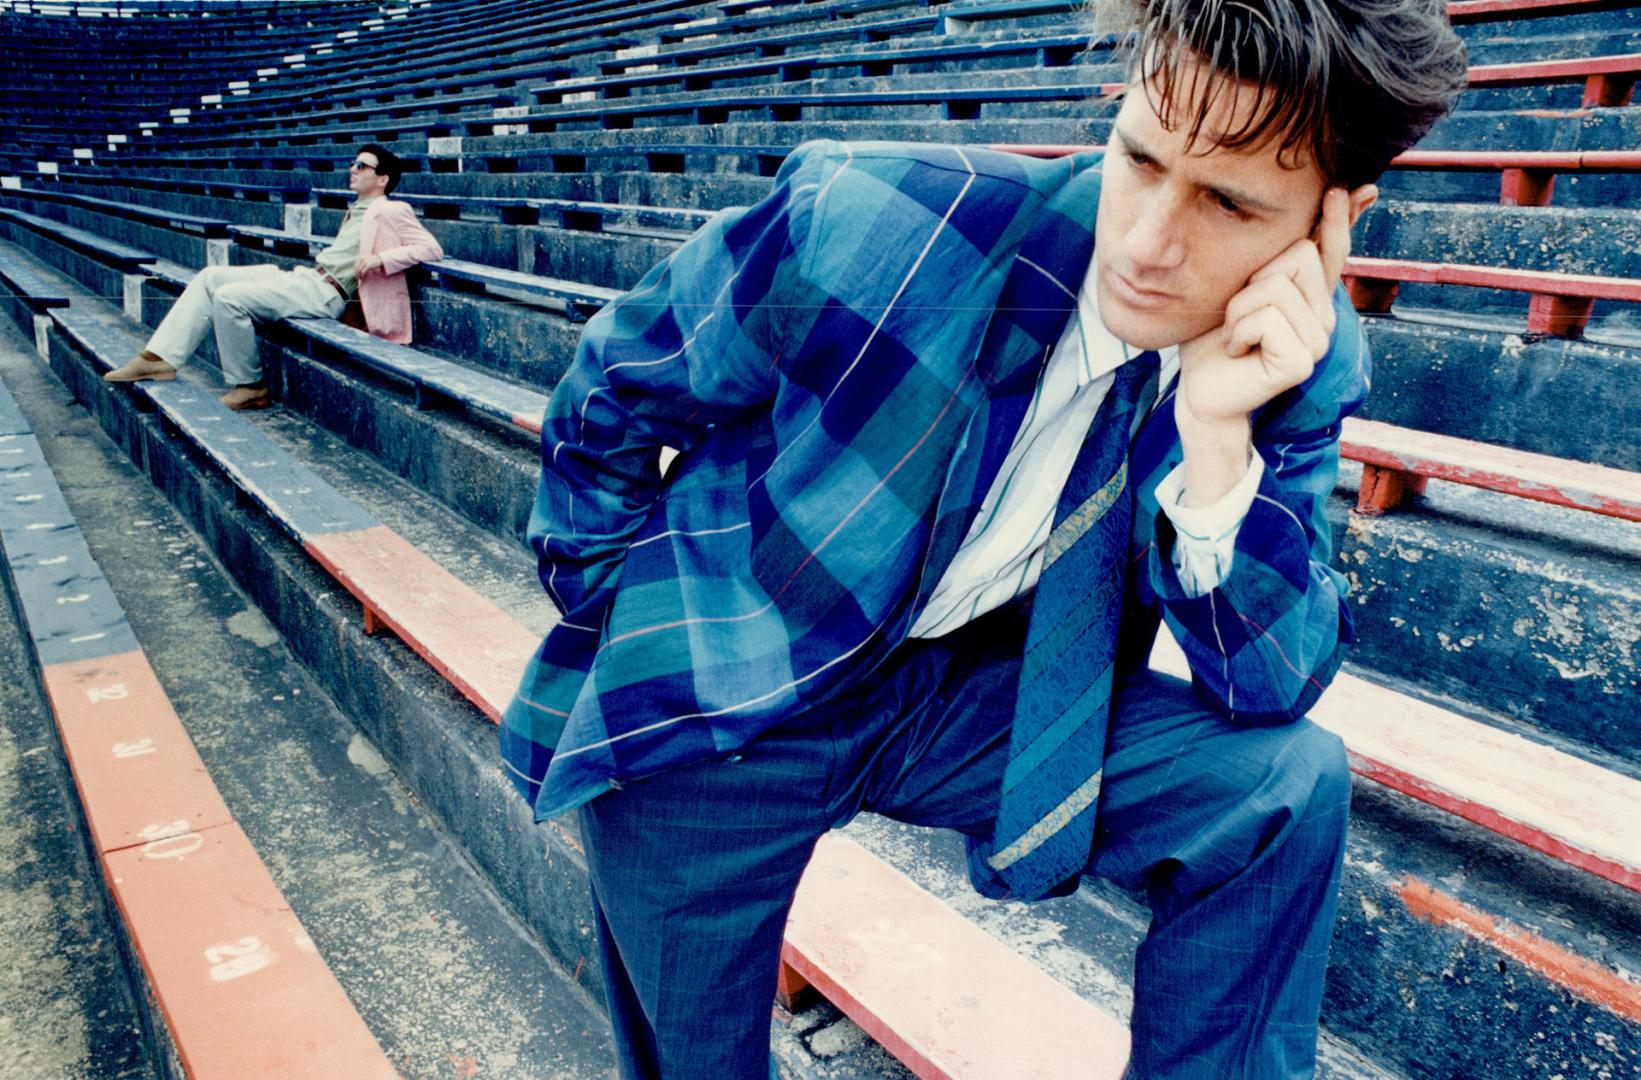 Above foreground, lightweight checked linen sports jacket in shades of blue, $350, is worn with a bright green and white striped shirt, $120, blue tro(...)